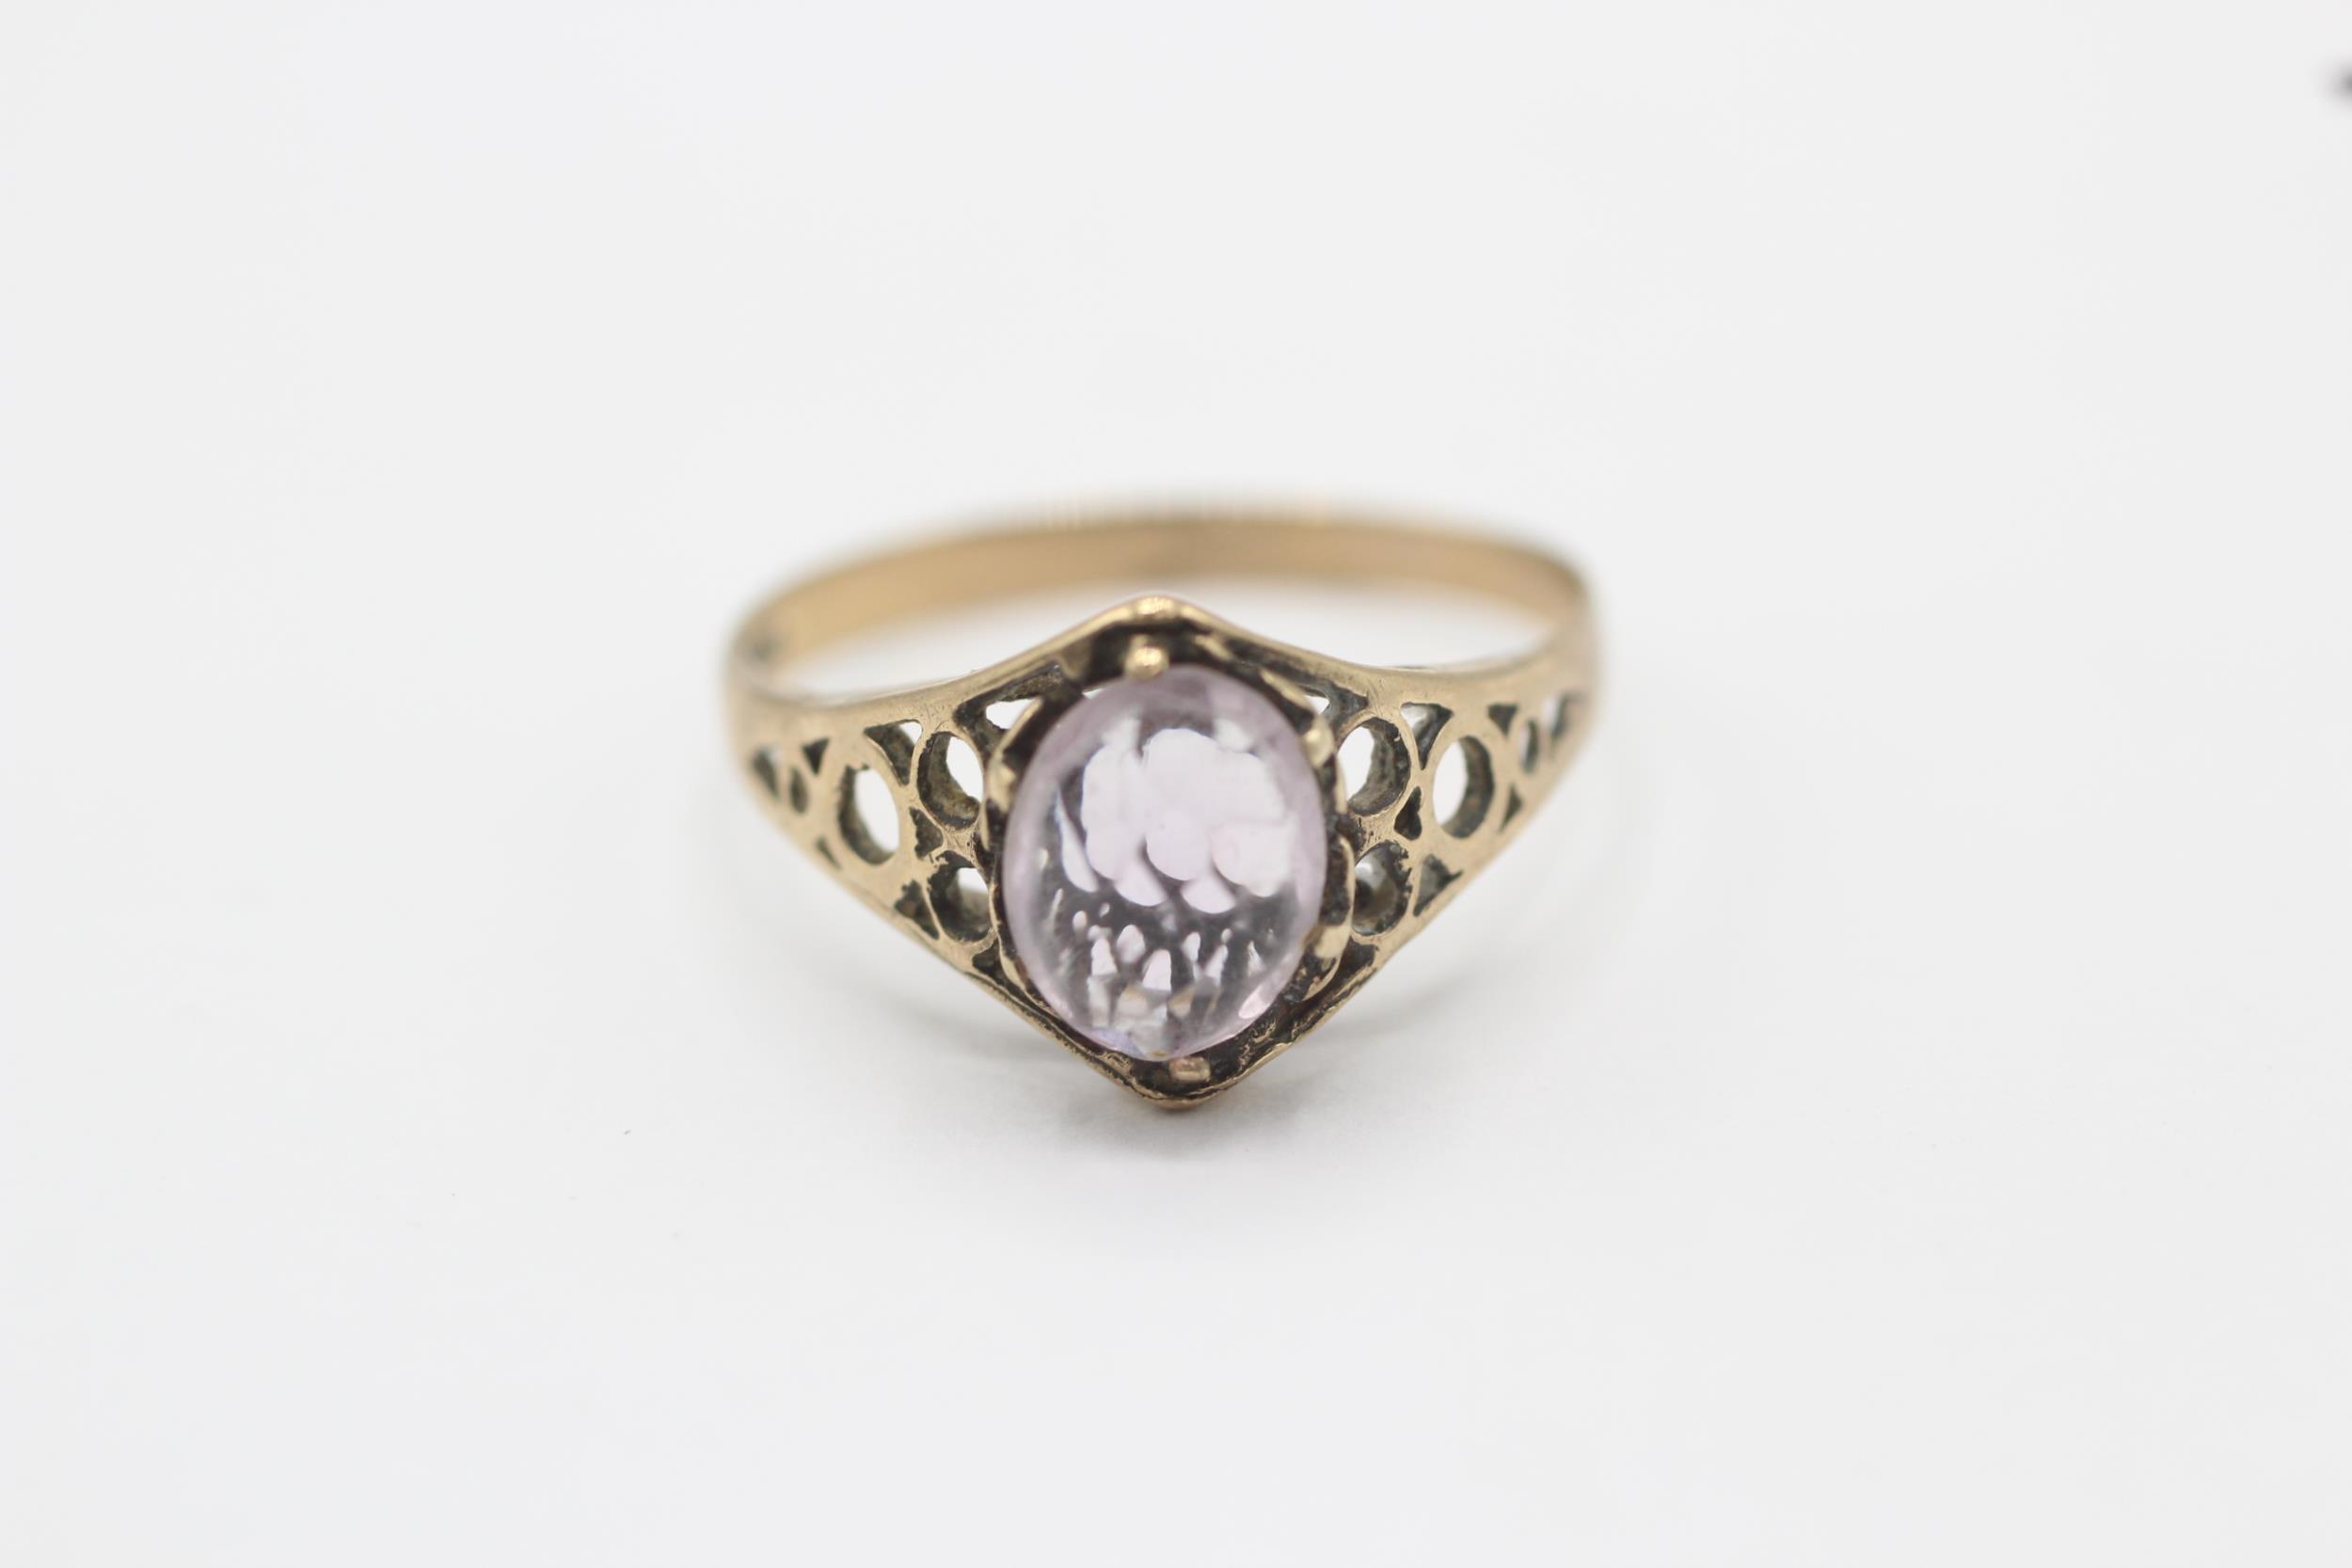 9ct gold amethyst single stone ring with openwork shank Size O 1/2 1.6 g - Image 2 of 7